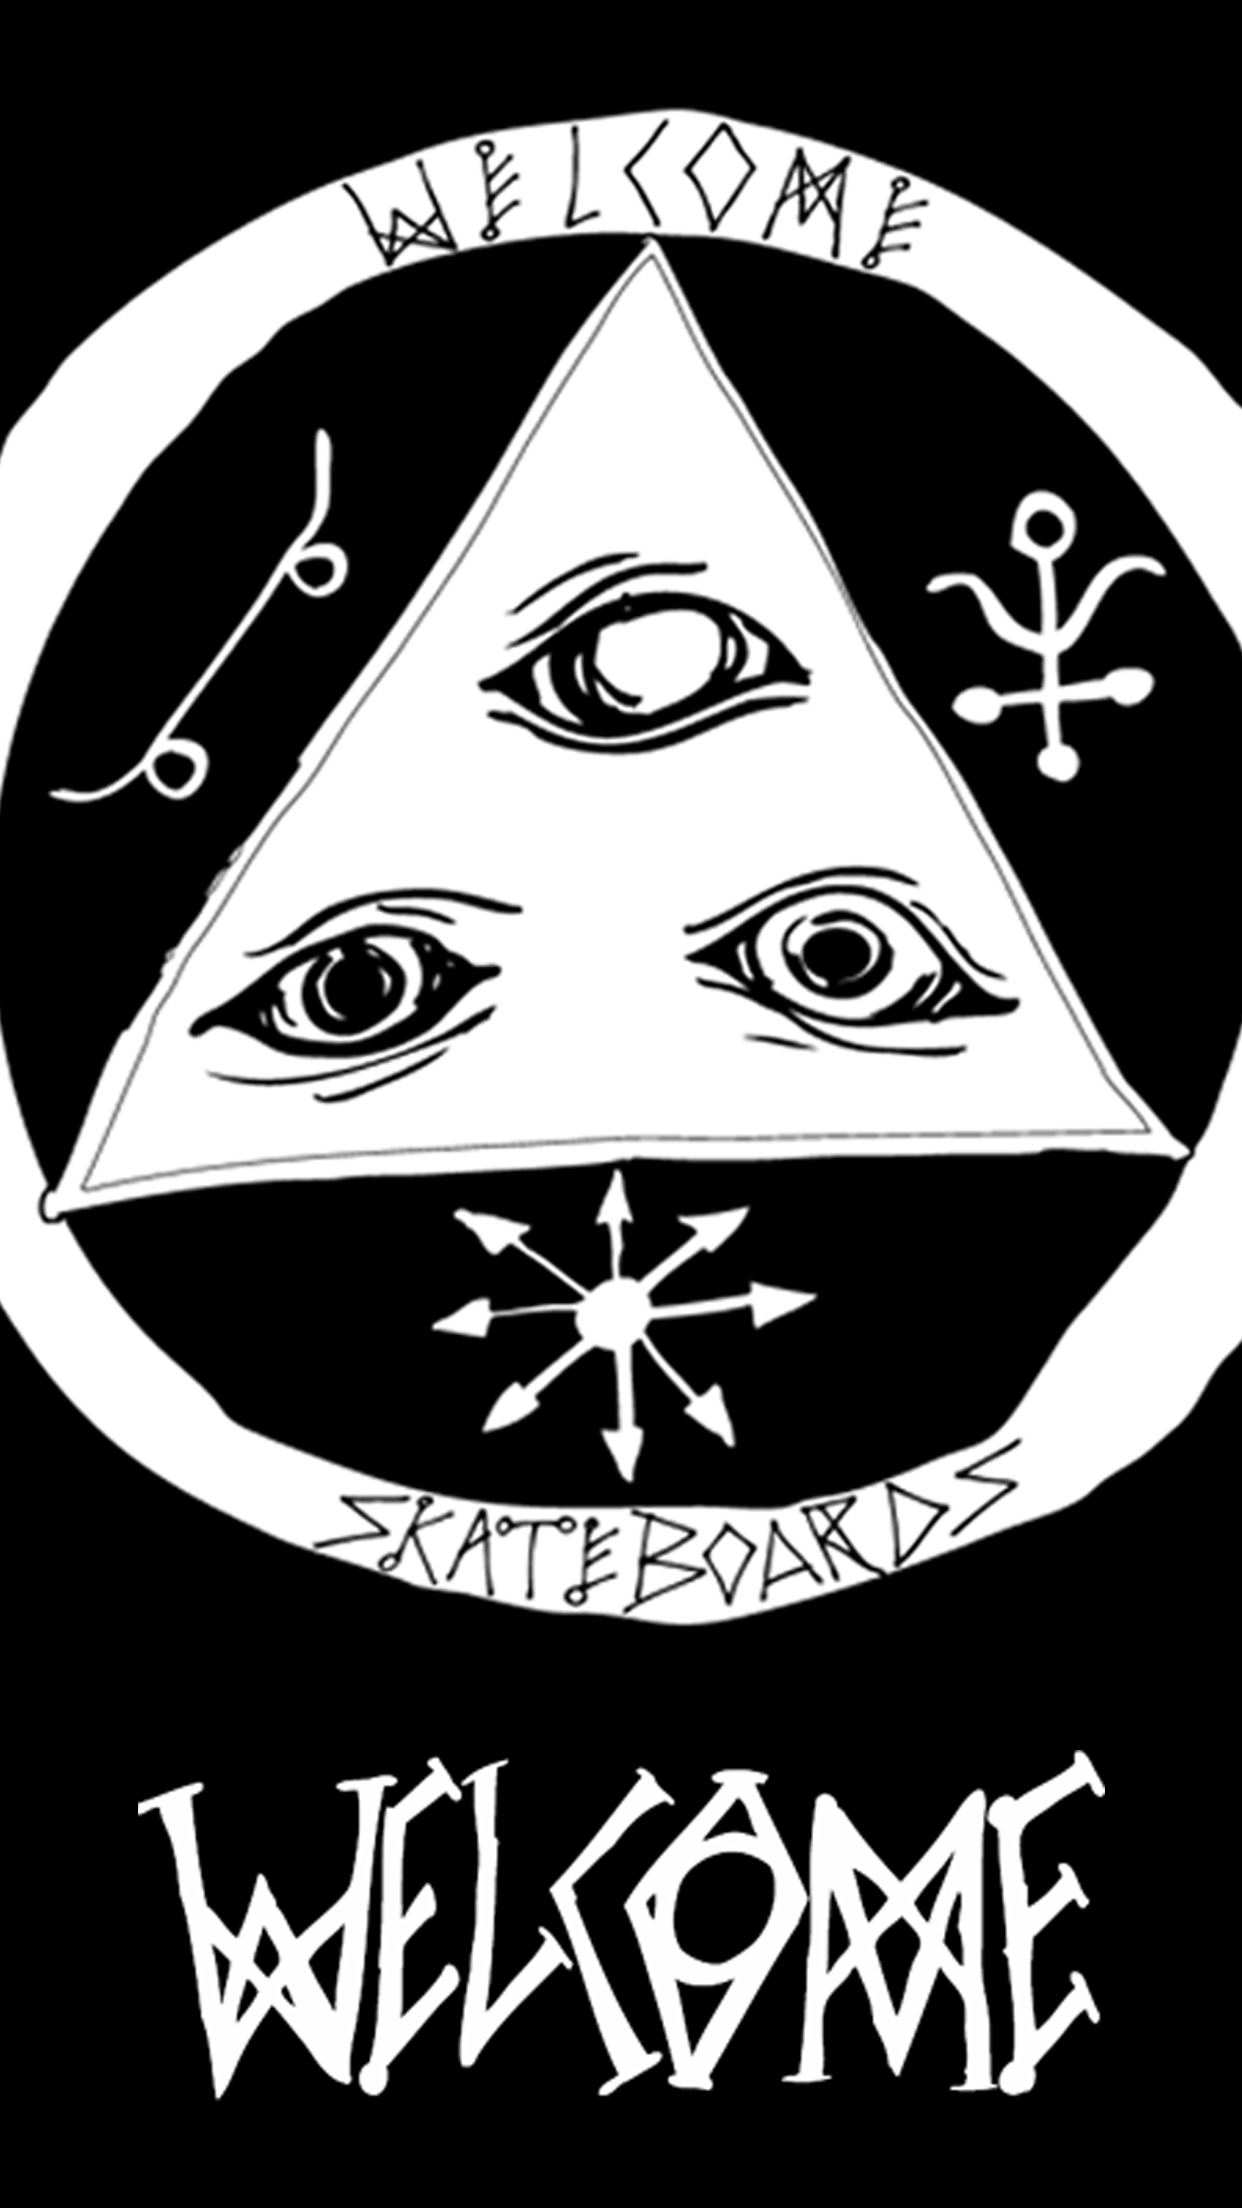 Triangle Skate Logo - Welcome Skateboards Black and White iPhone 6S Wallpaper. Joms